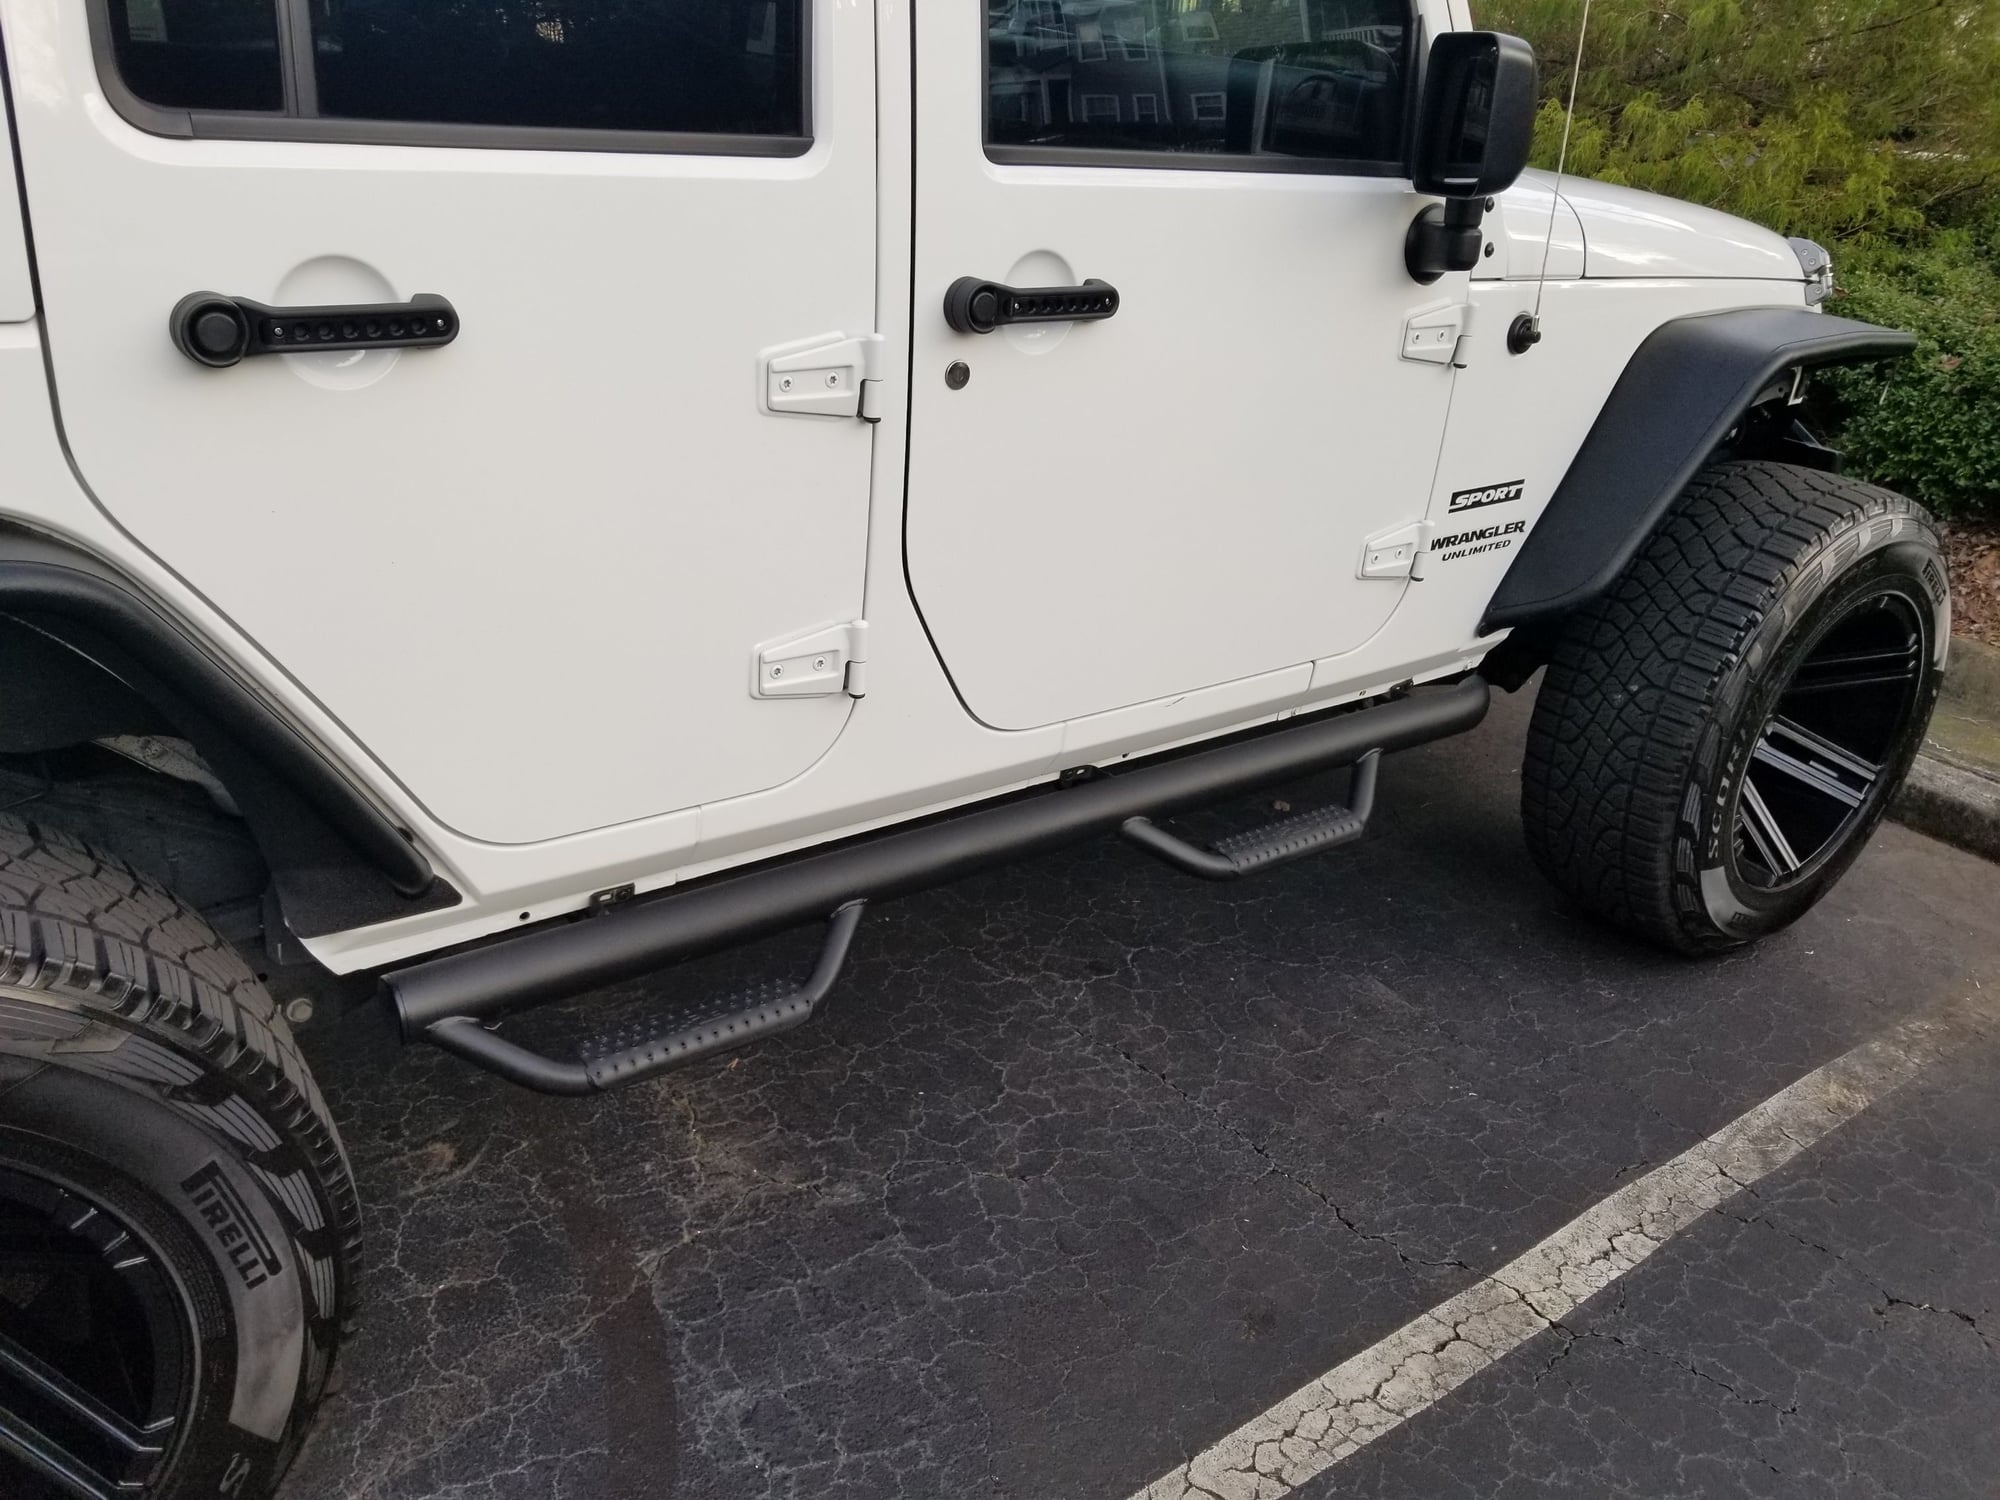 2017 Jeep Wrangler - Supercharged 2017 Jeep Wrangler Unlimited Sport - Used - VIN 1C4BJWDG0HL570865 - 28,500 Miles - 6 cyl - 4WD - Manual - SUV - White - Dunwoody, GA 30338, United States